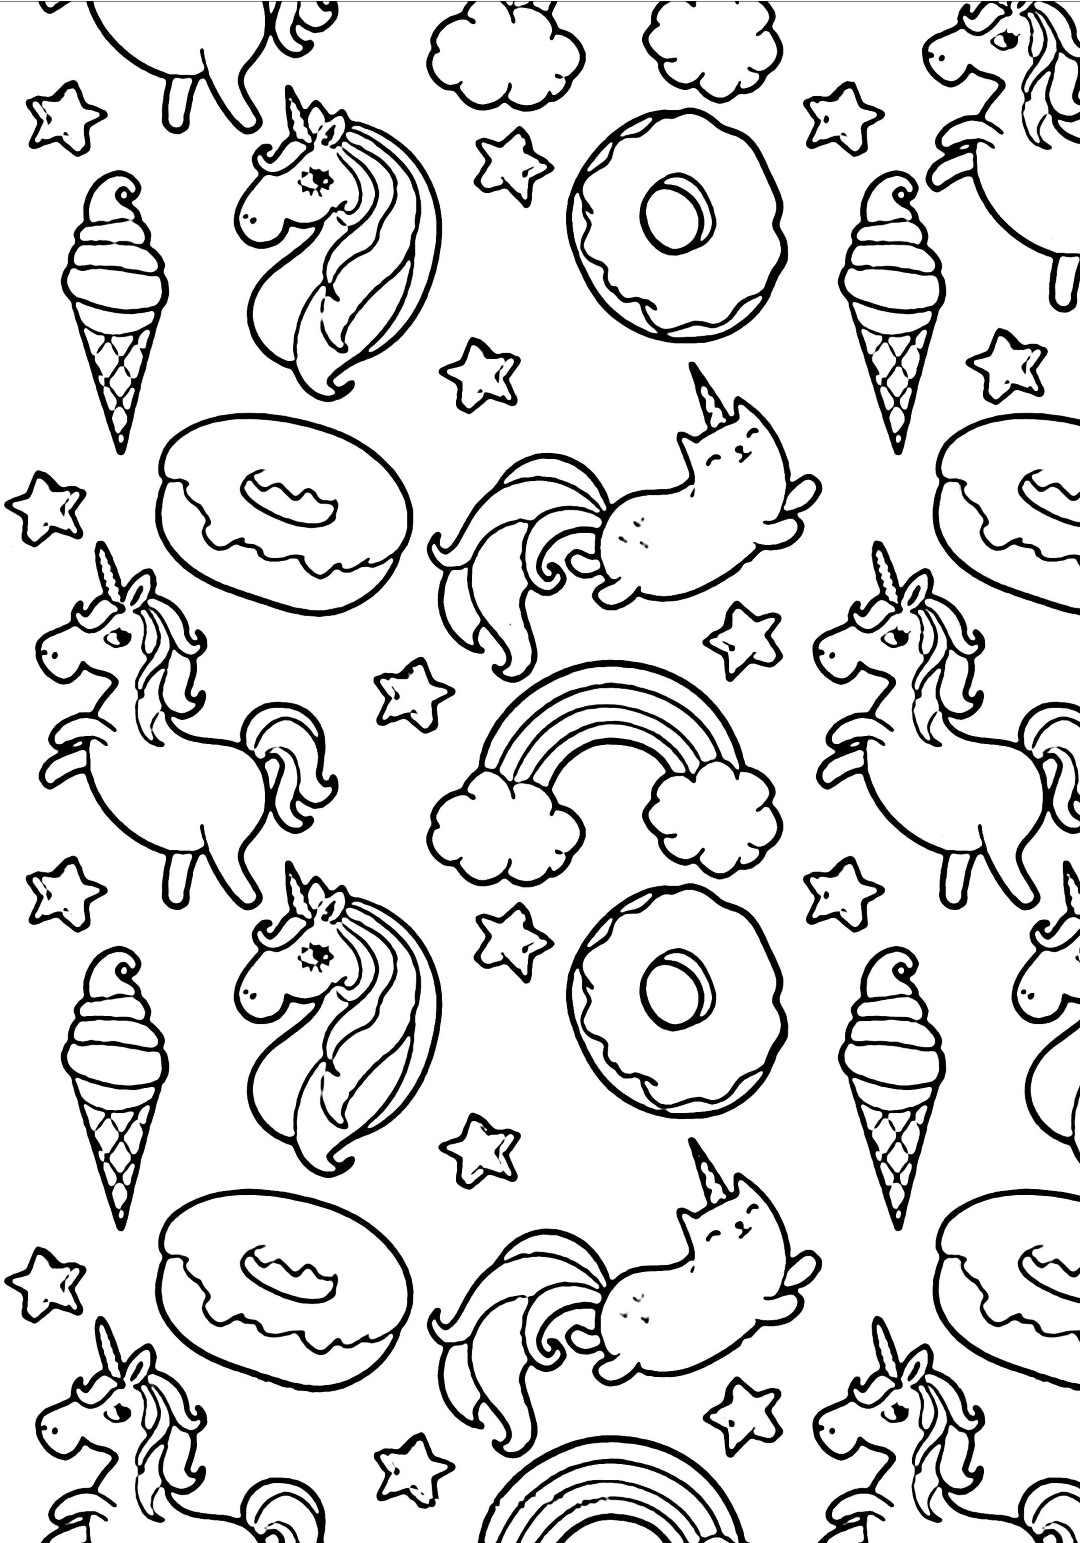 Donut Coloring Pages   Best Coloring Pages For Kids